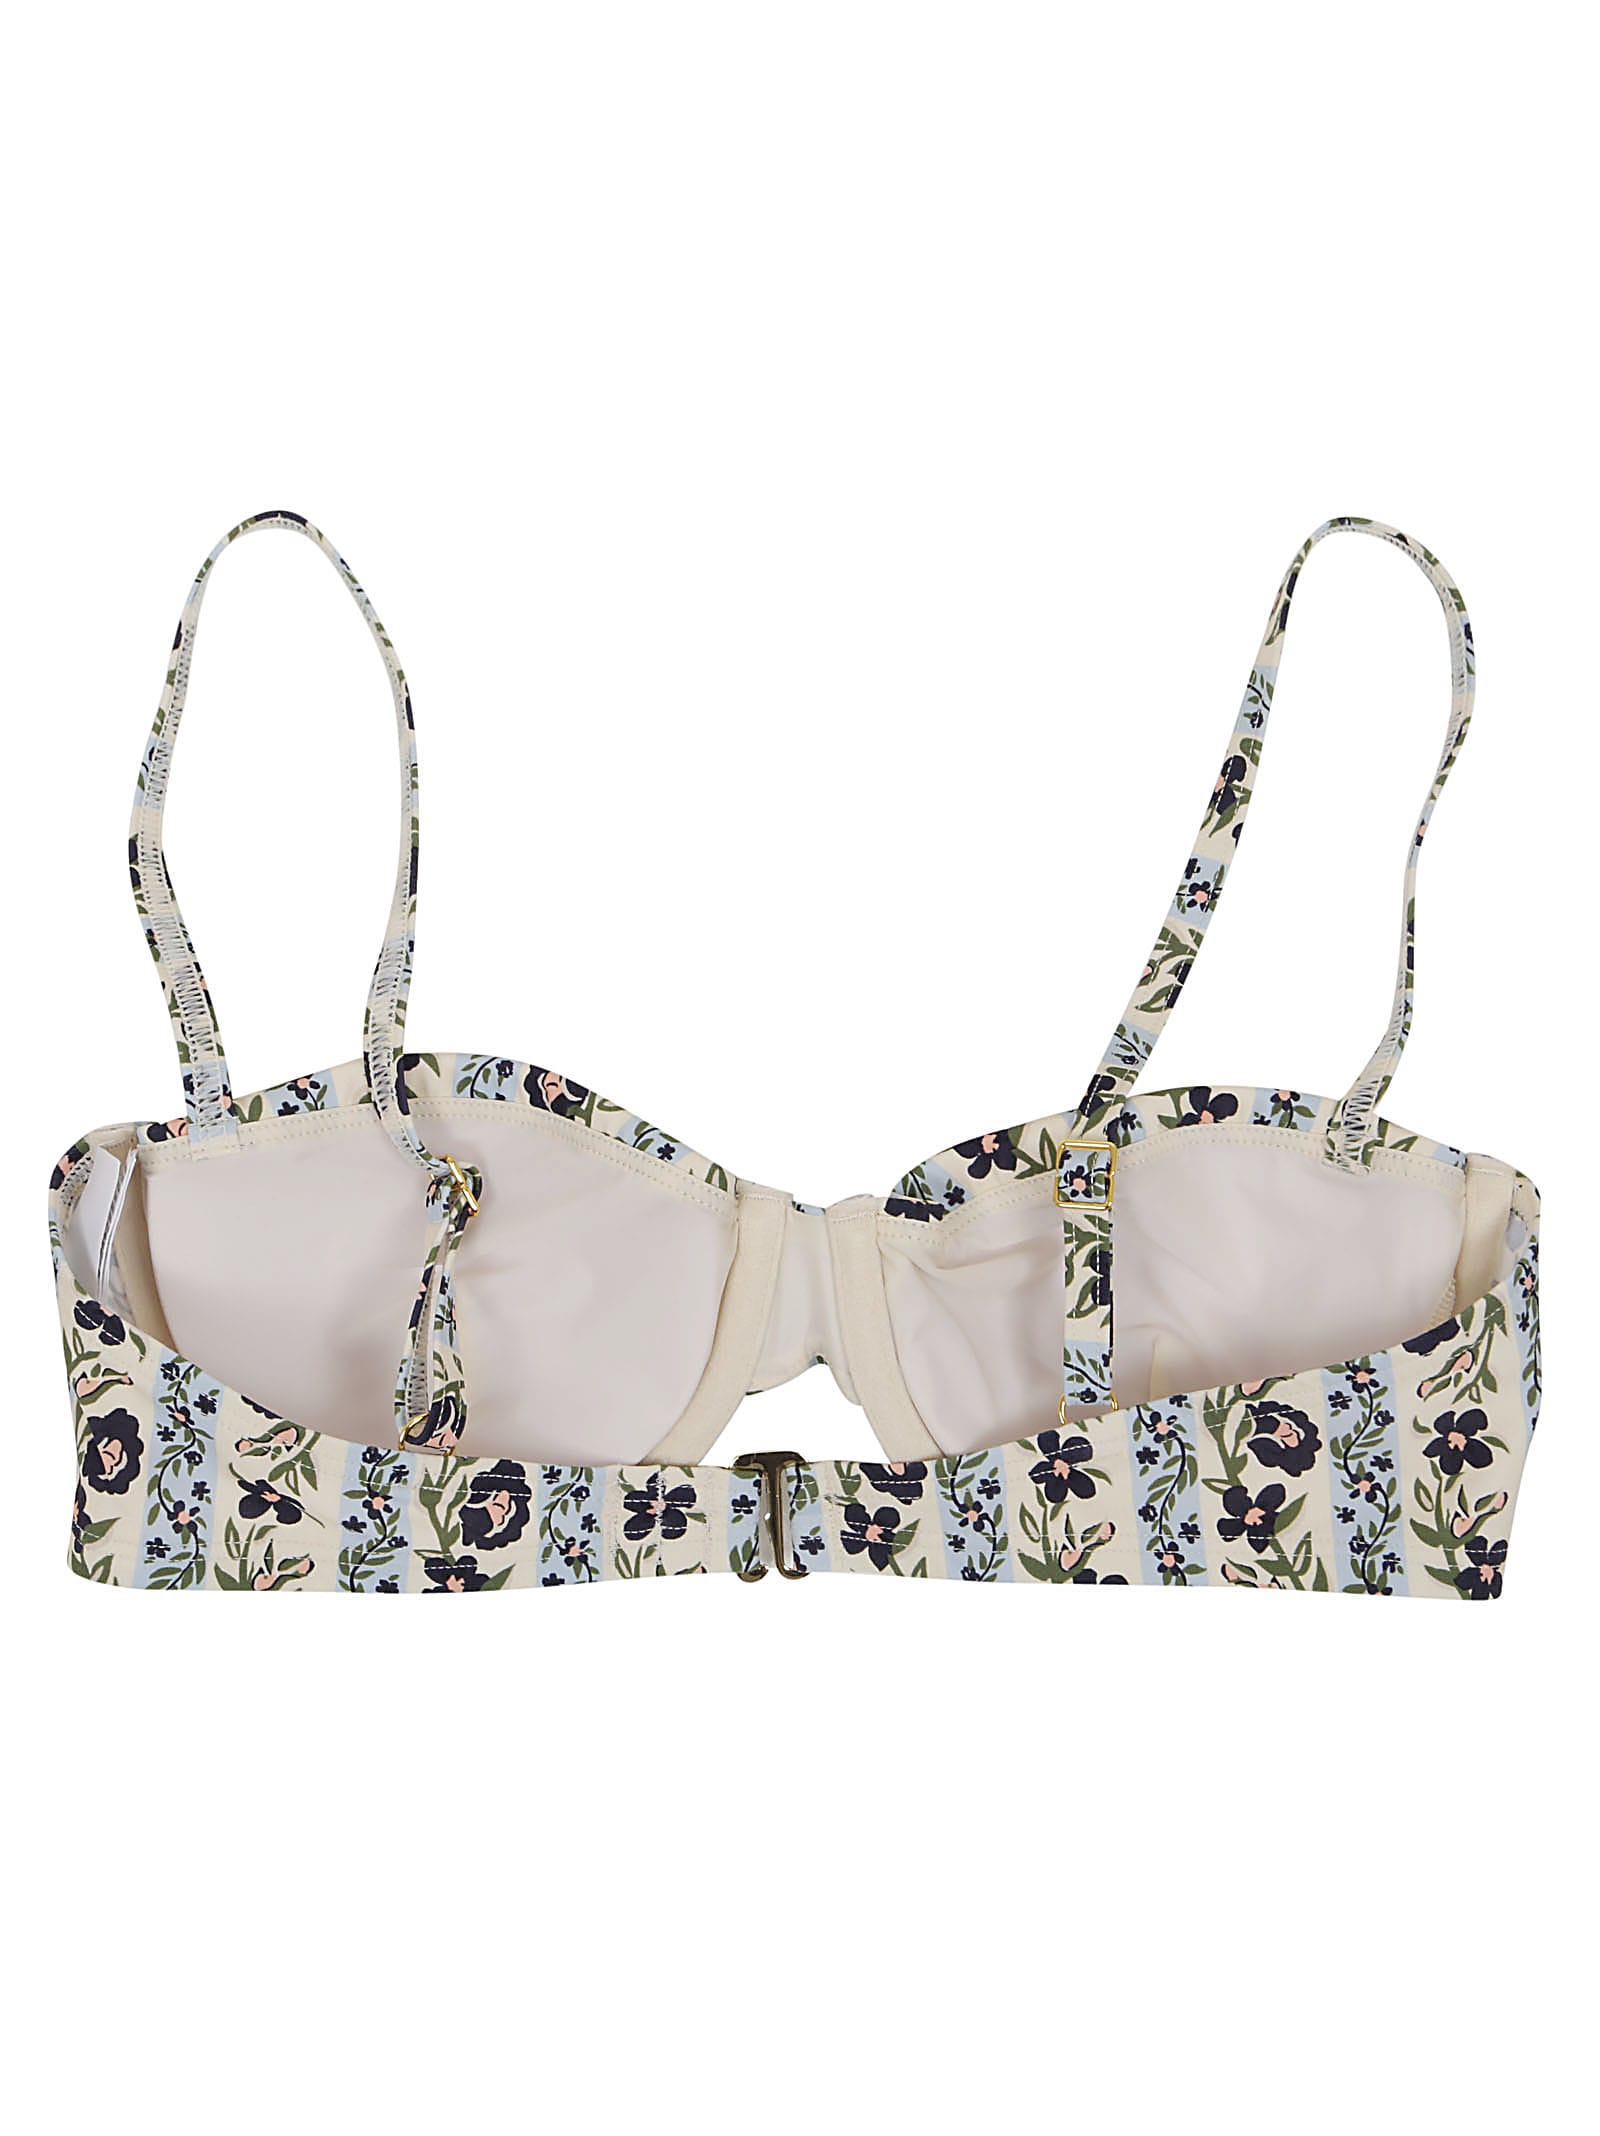 Tory Burch Printed Underwire Top